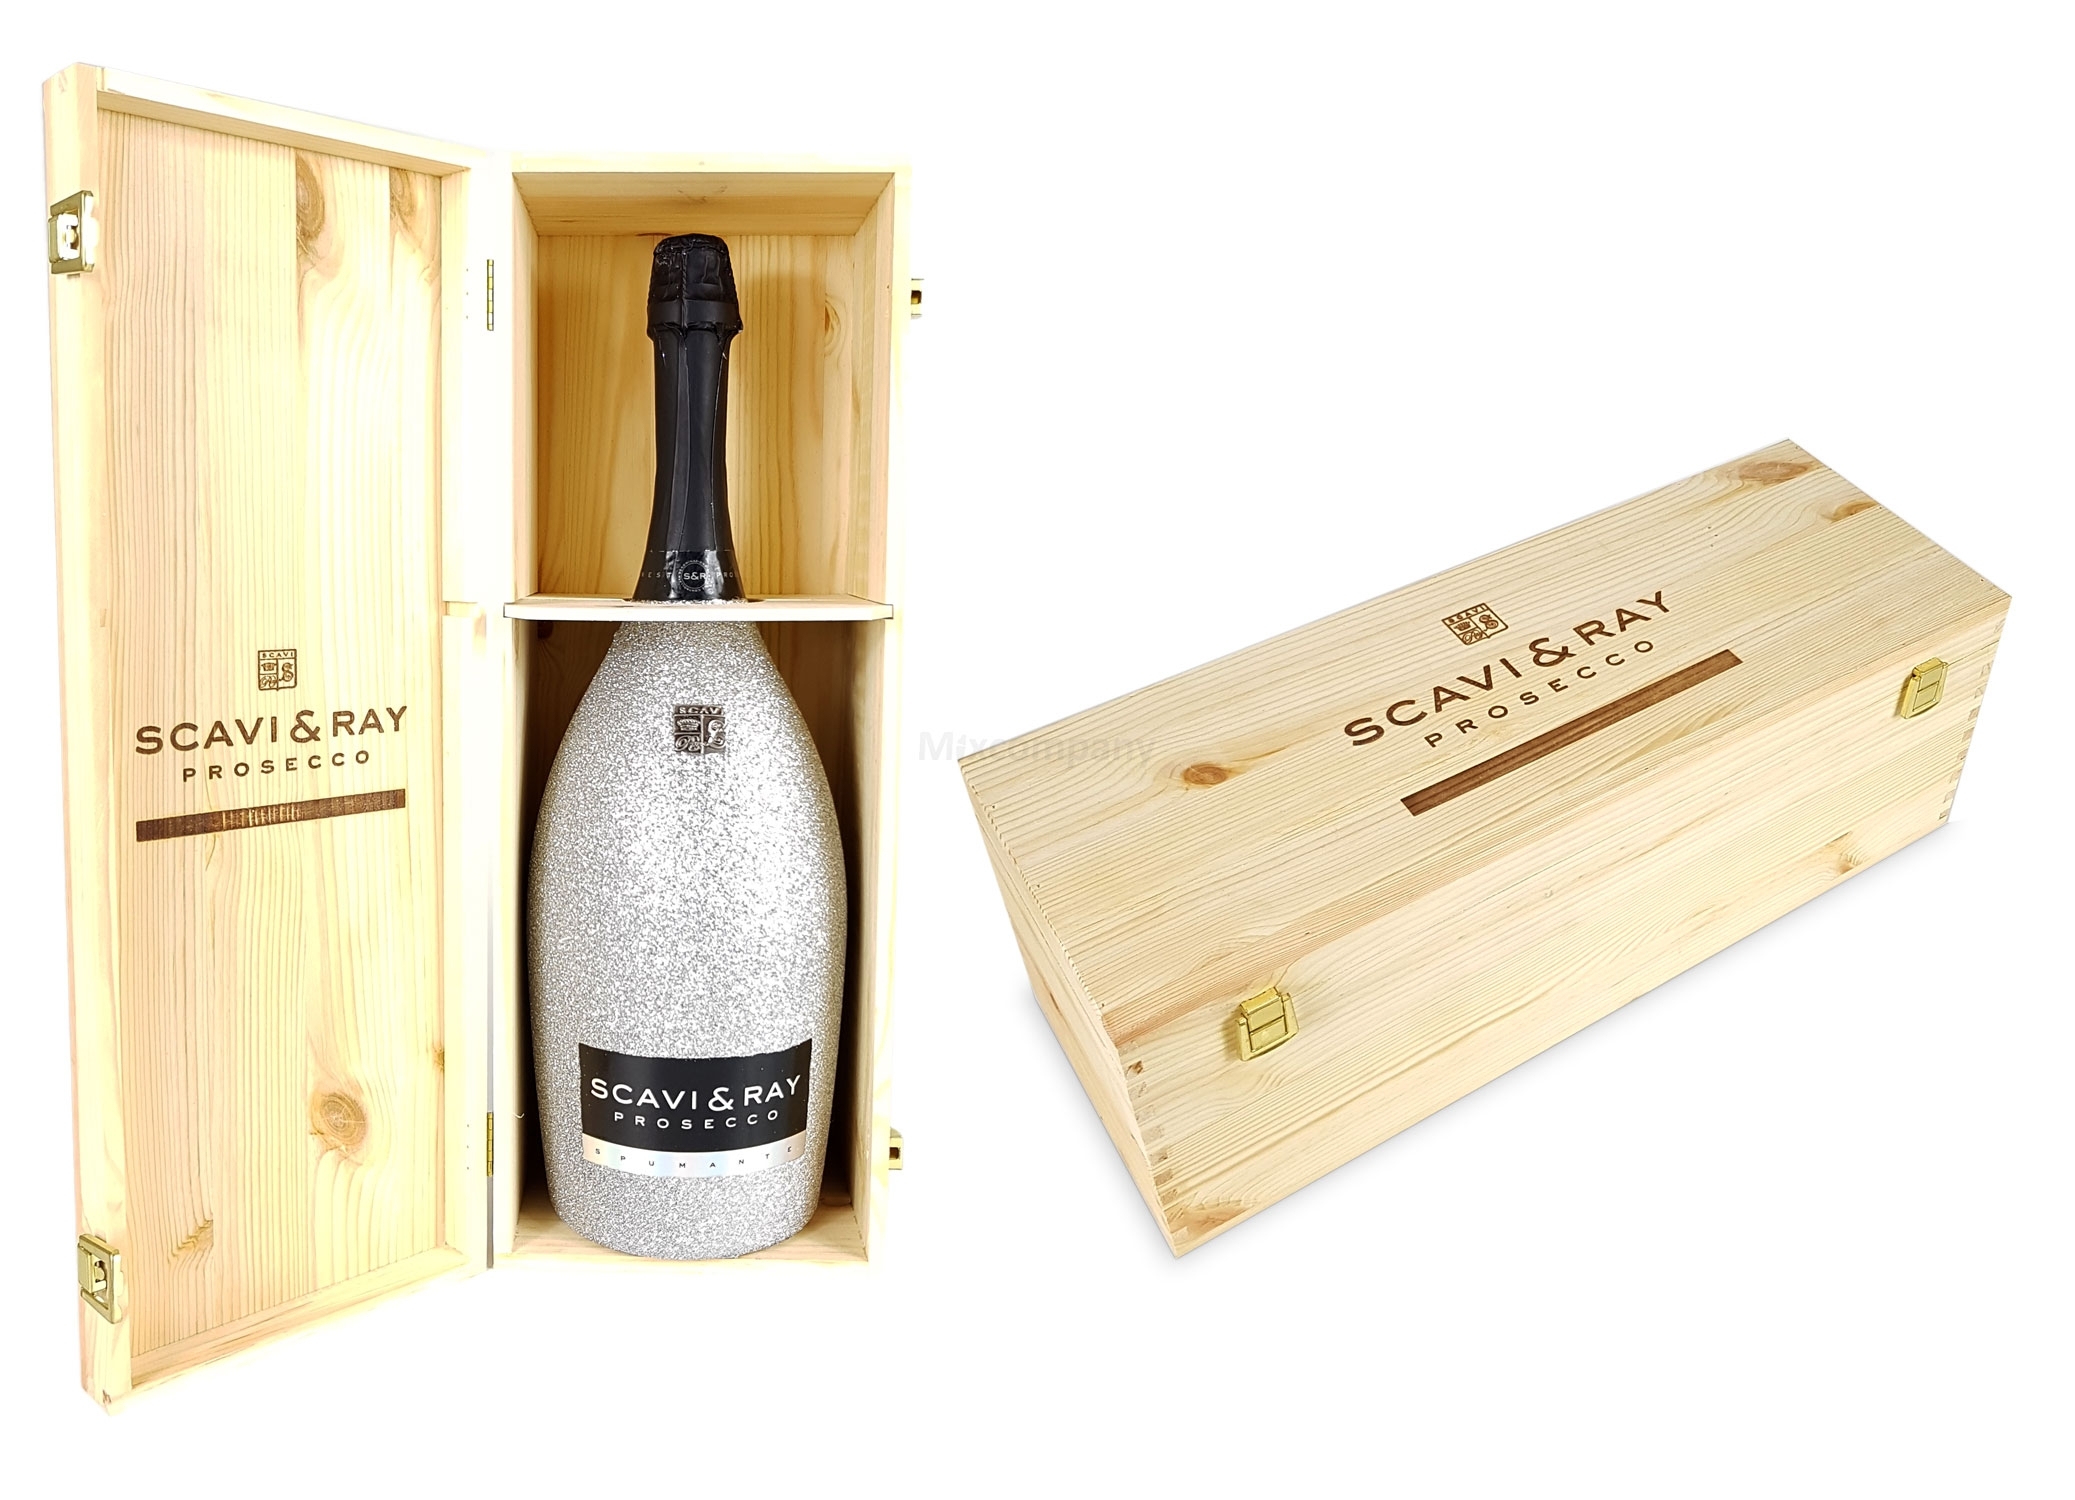 Scavi & Ray Prosecco Spumante Magnum 3l (11% Vol) Bling Bling Glitzerflasche Silber + Holzbox Holzkiste -[Enthält Sulfite]